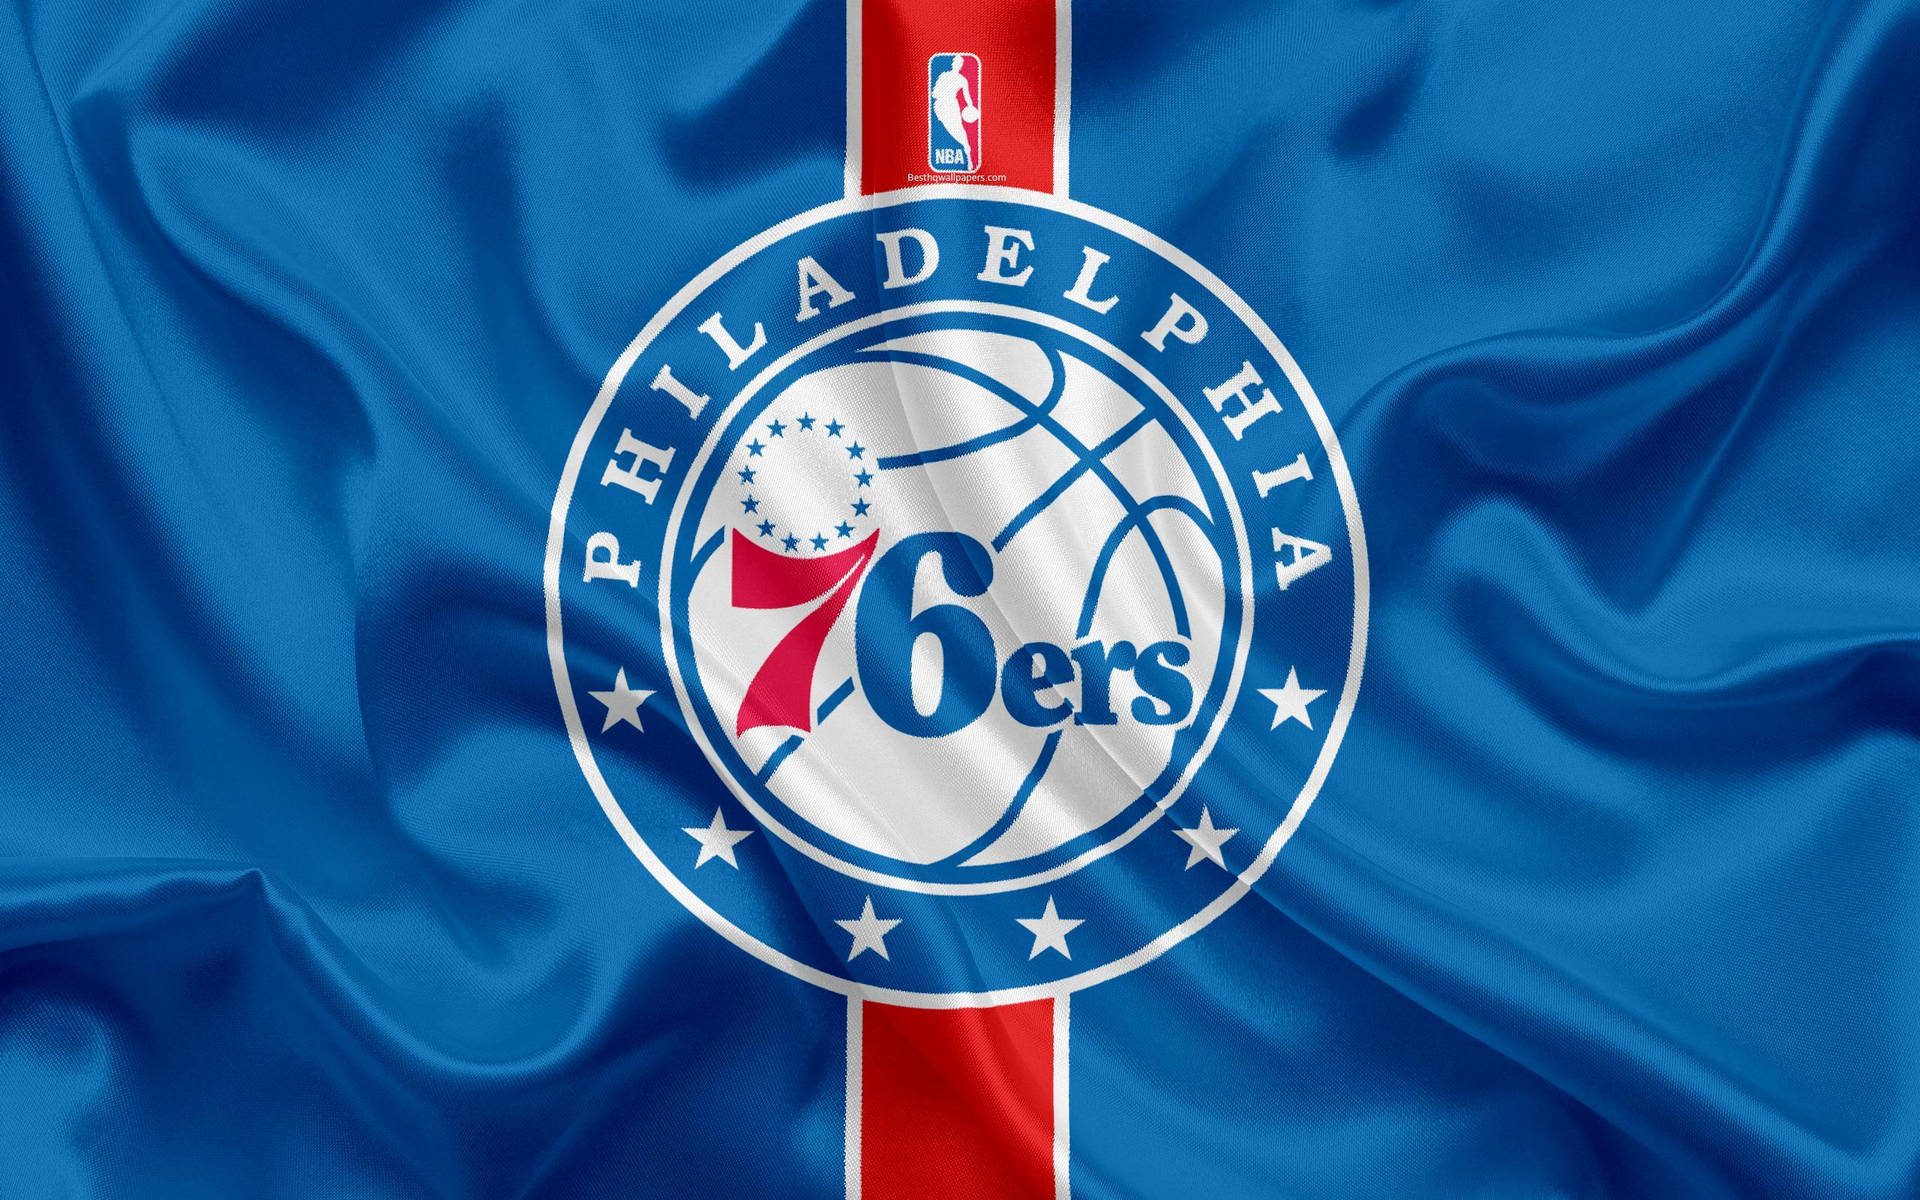 Philadelphia 76ers on Twitter Toyota Wallpaper form for the real ones  HereTheyCome httpstco7bLayXD84W  Twitter